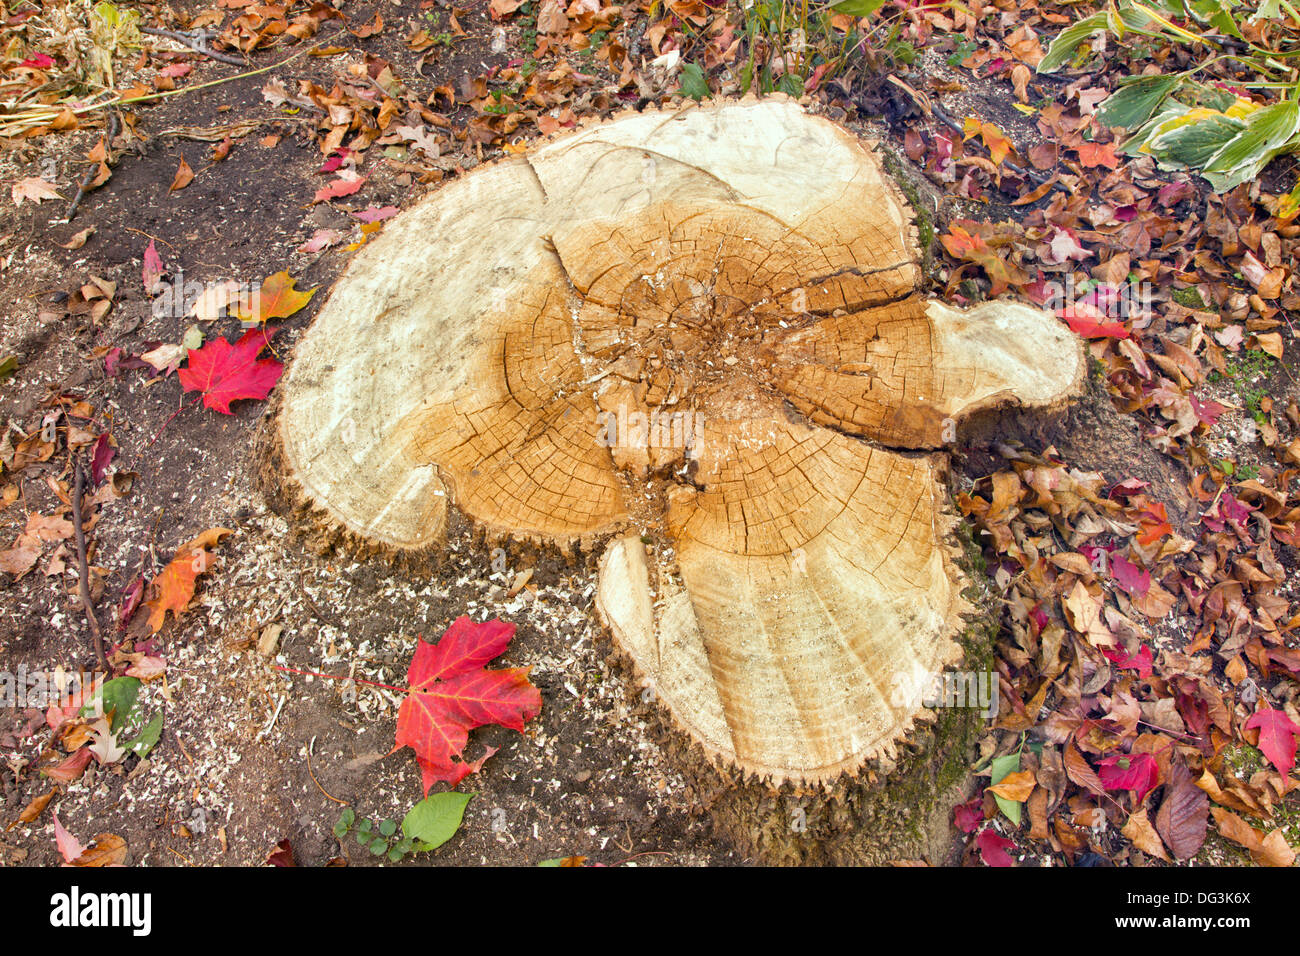 Ash tree stump showing heart rot fungal disease that causes the decay of wood at the center of tree trunks. Stock Photo